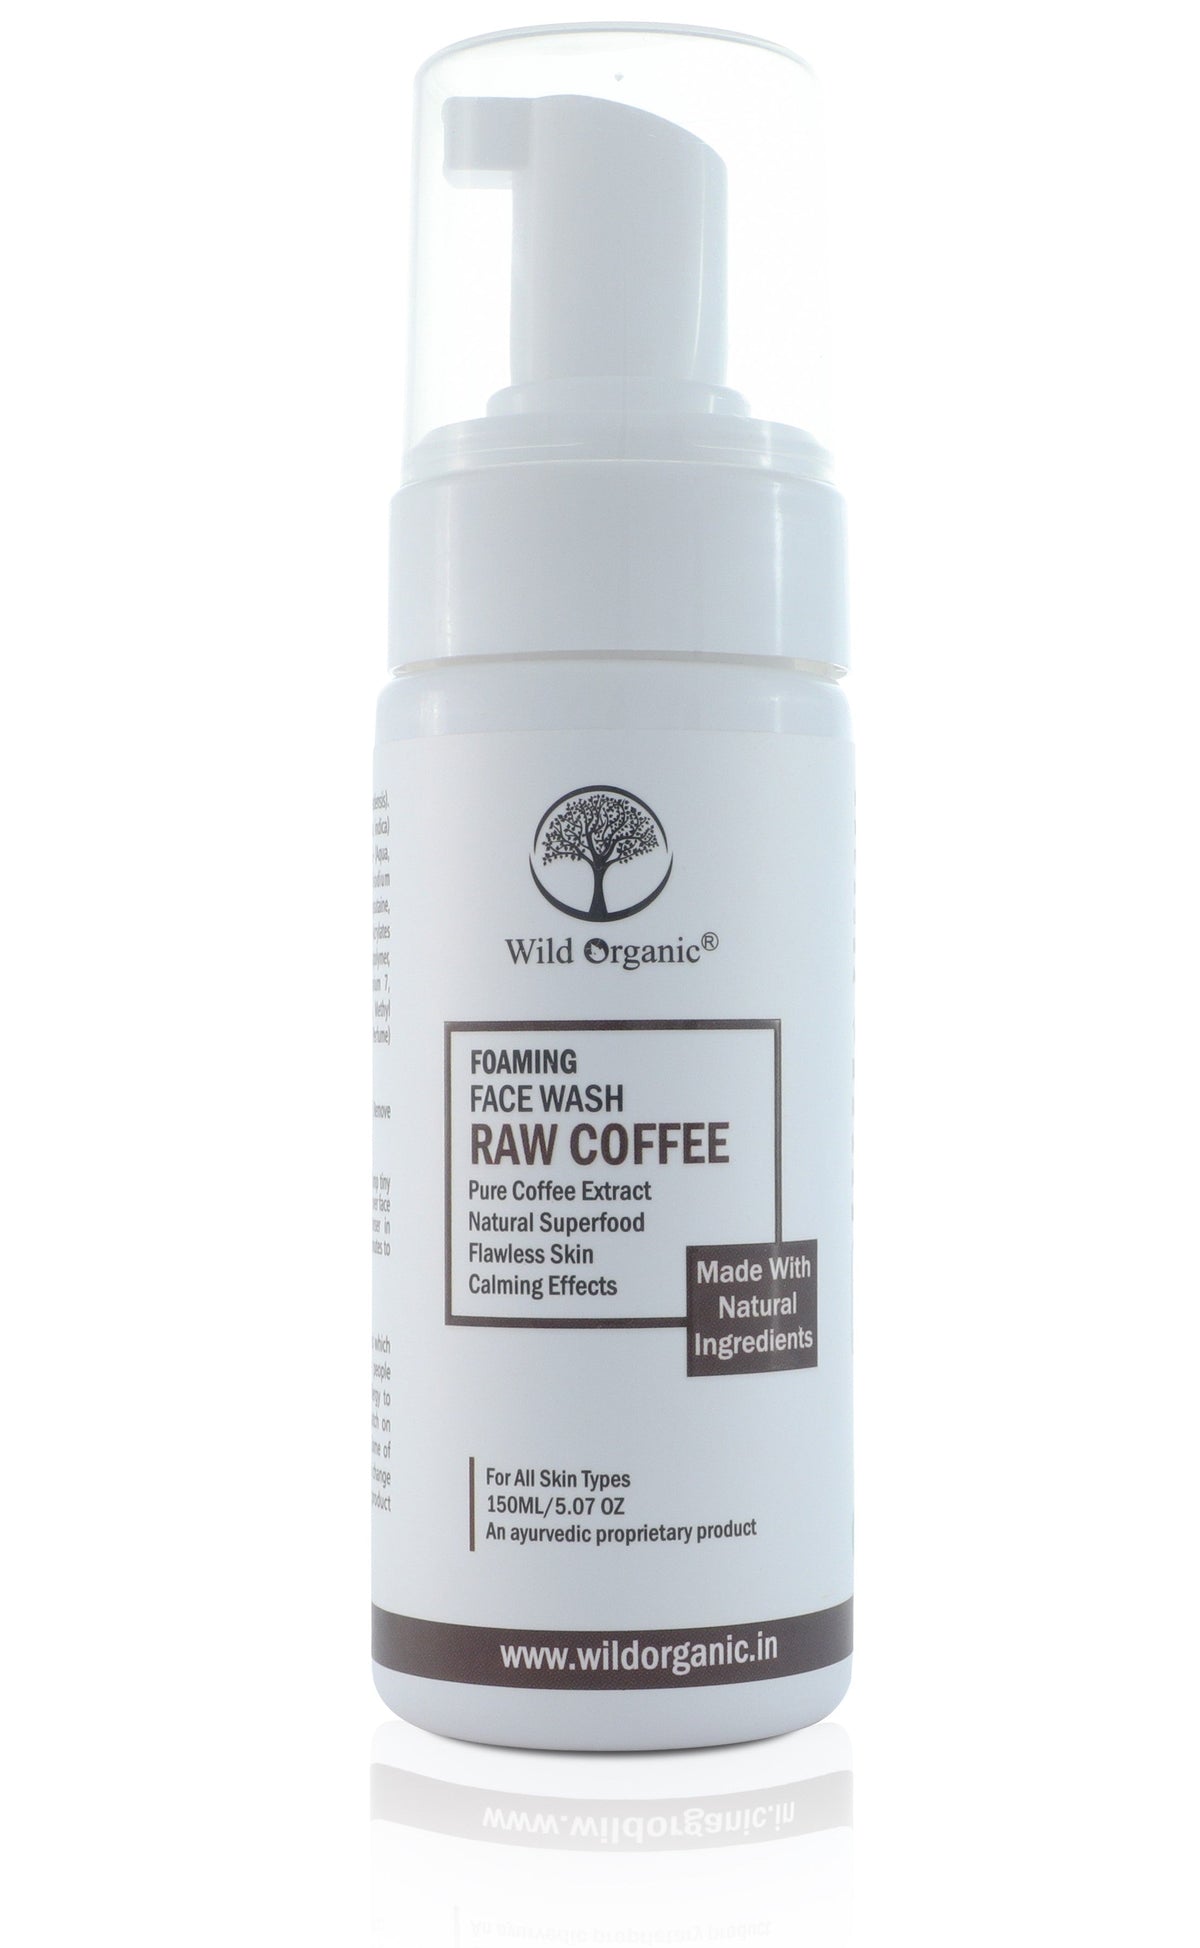 Raw Coffee Faoming Face Wash Pure Coffee Extract Natural Superfood Flawless Skin Calming effect 150Ml